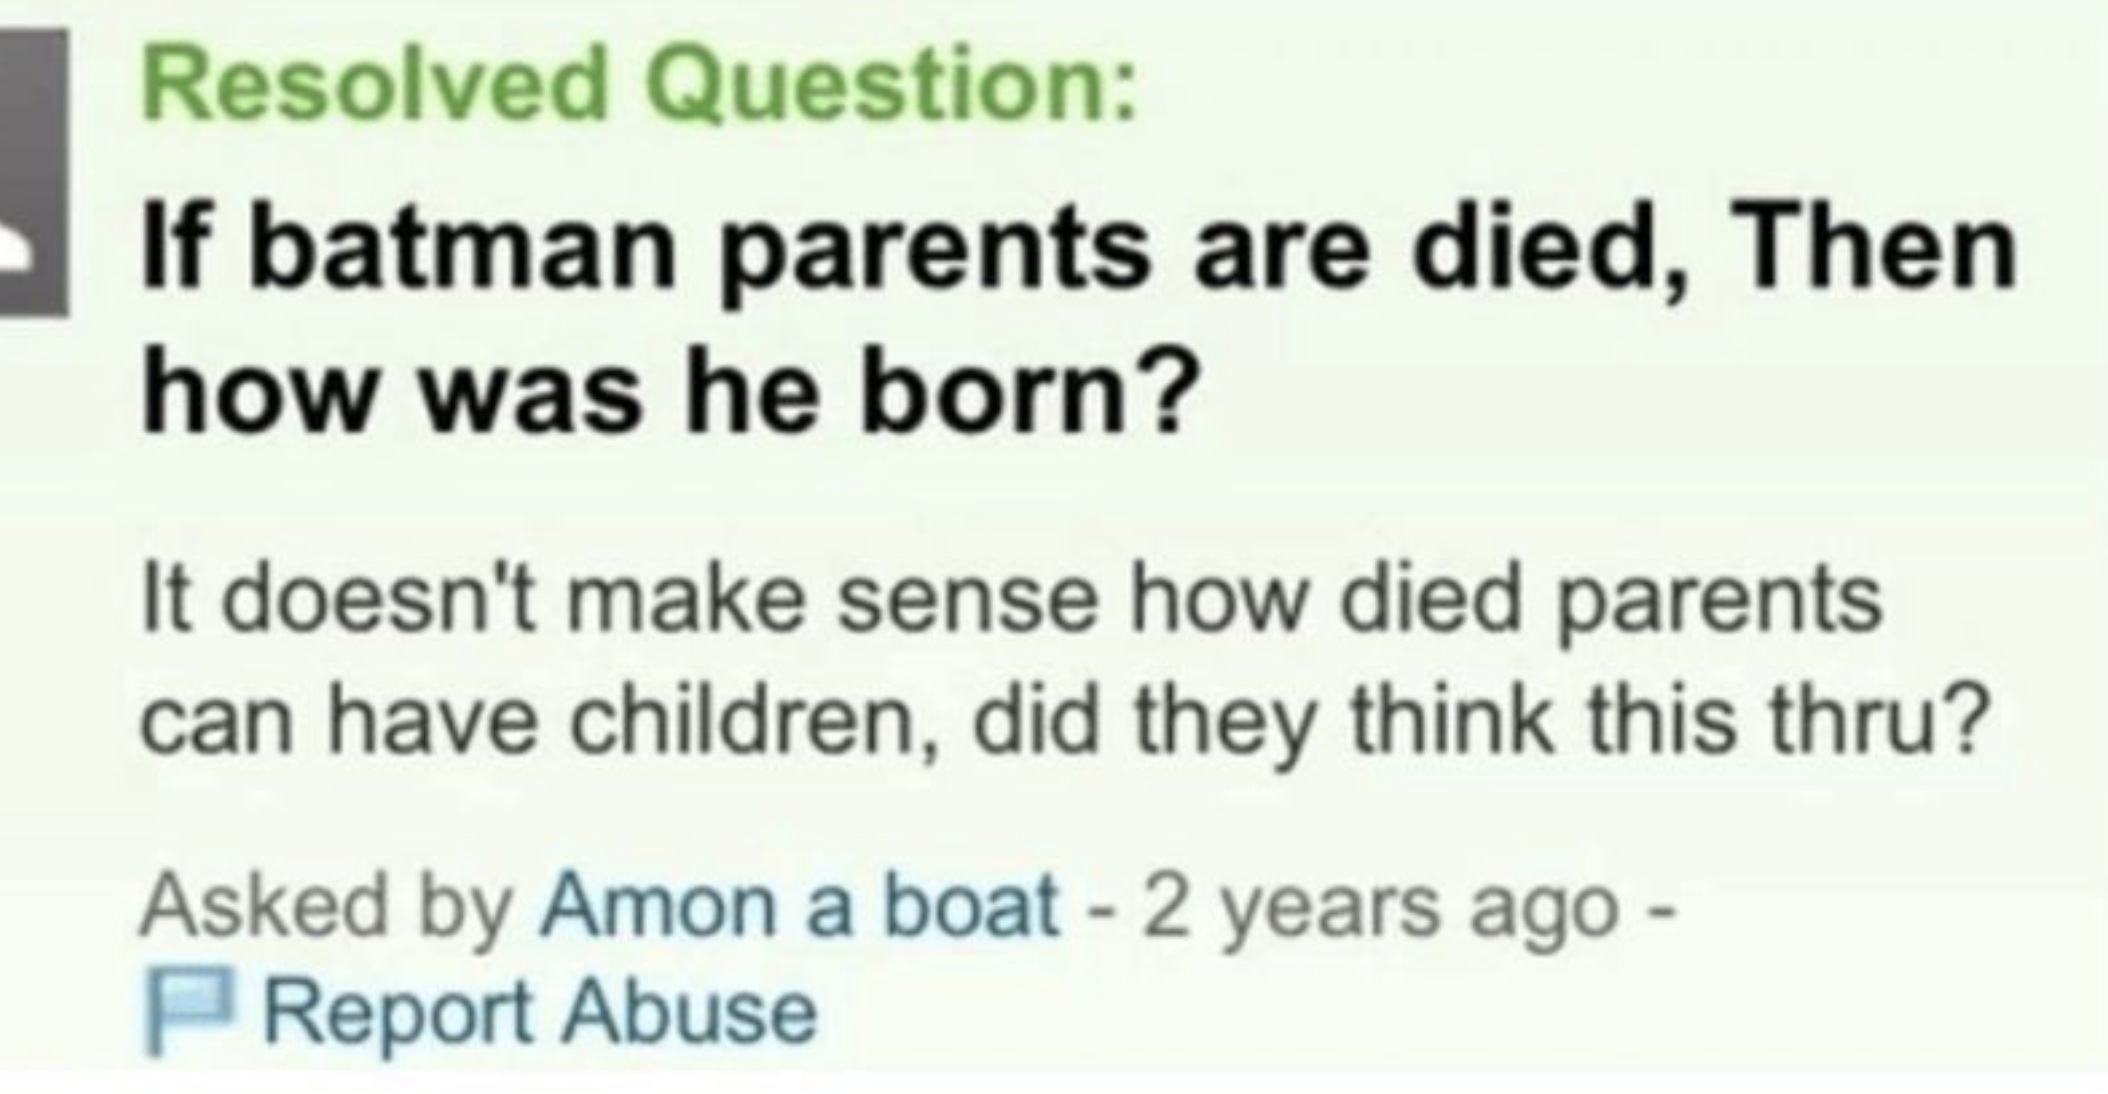 One asked, &quot;If batman parents are died, then how was he born?&quot;